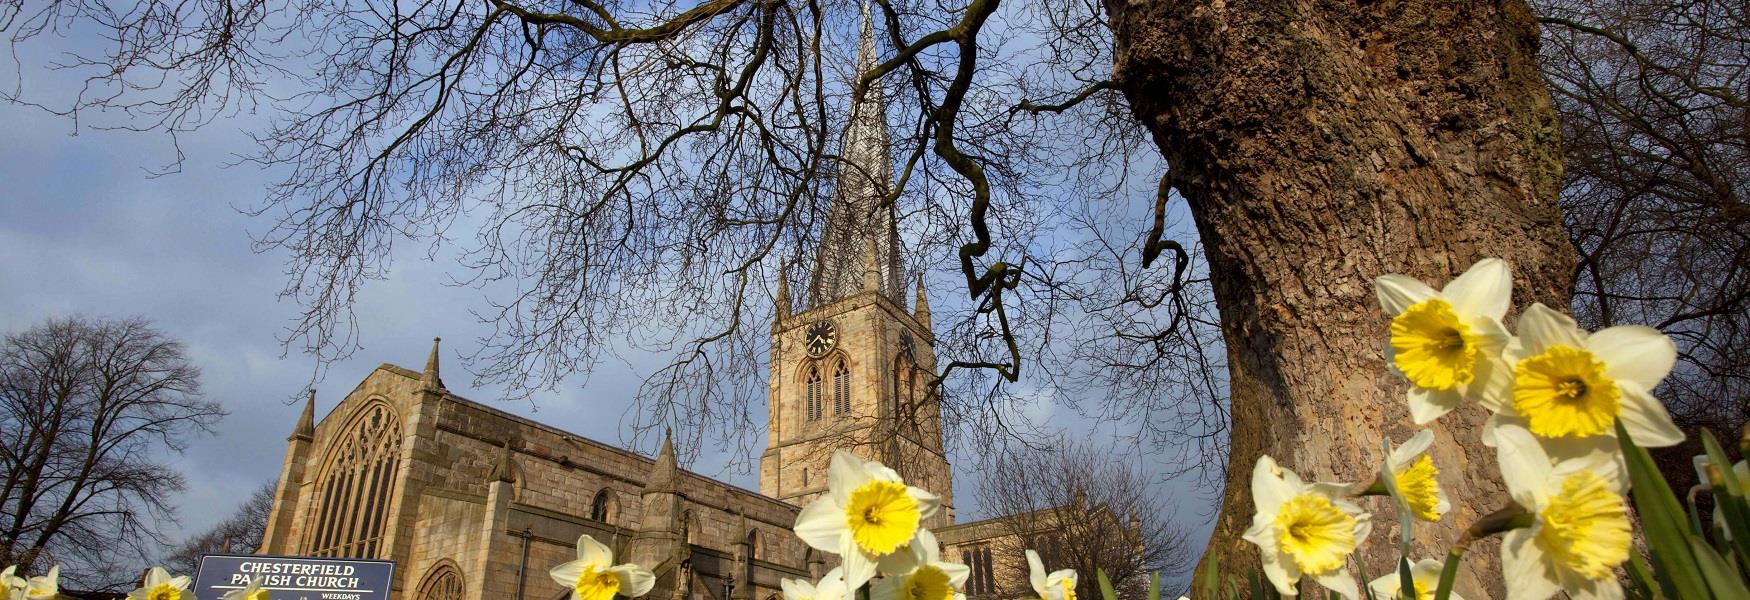 Crooked Spire, Chesterfield in spring with daffodils flowering